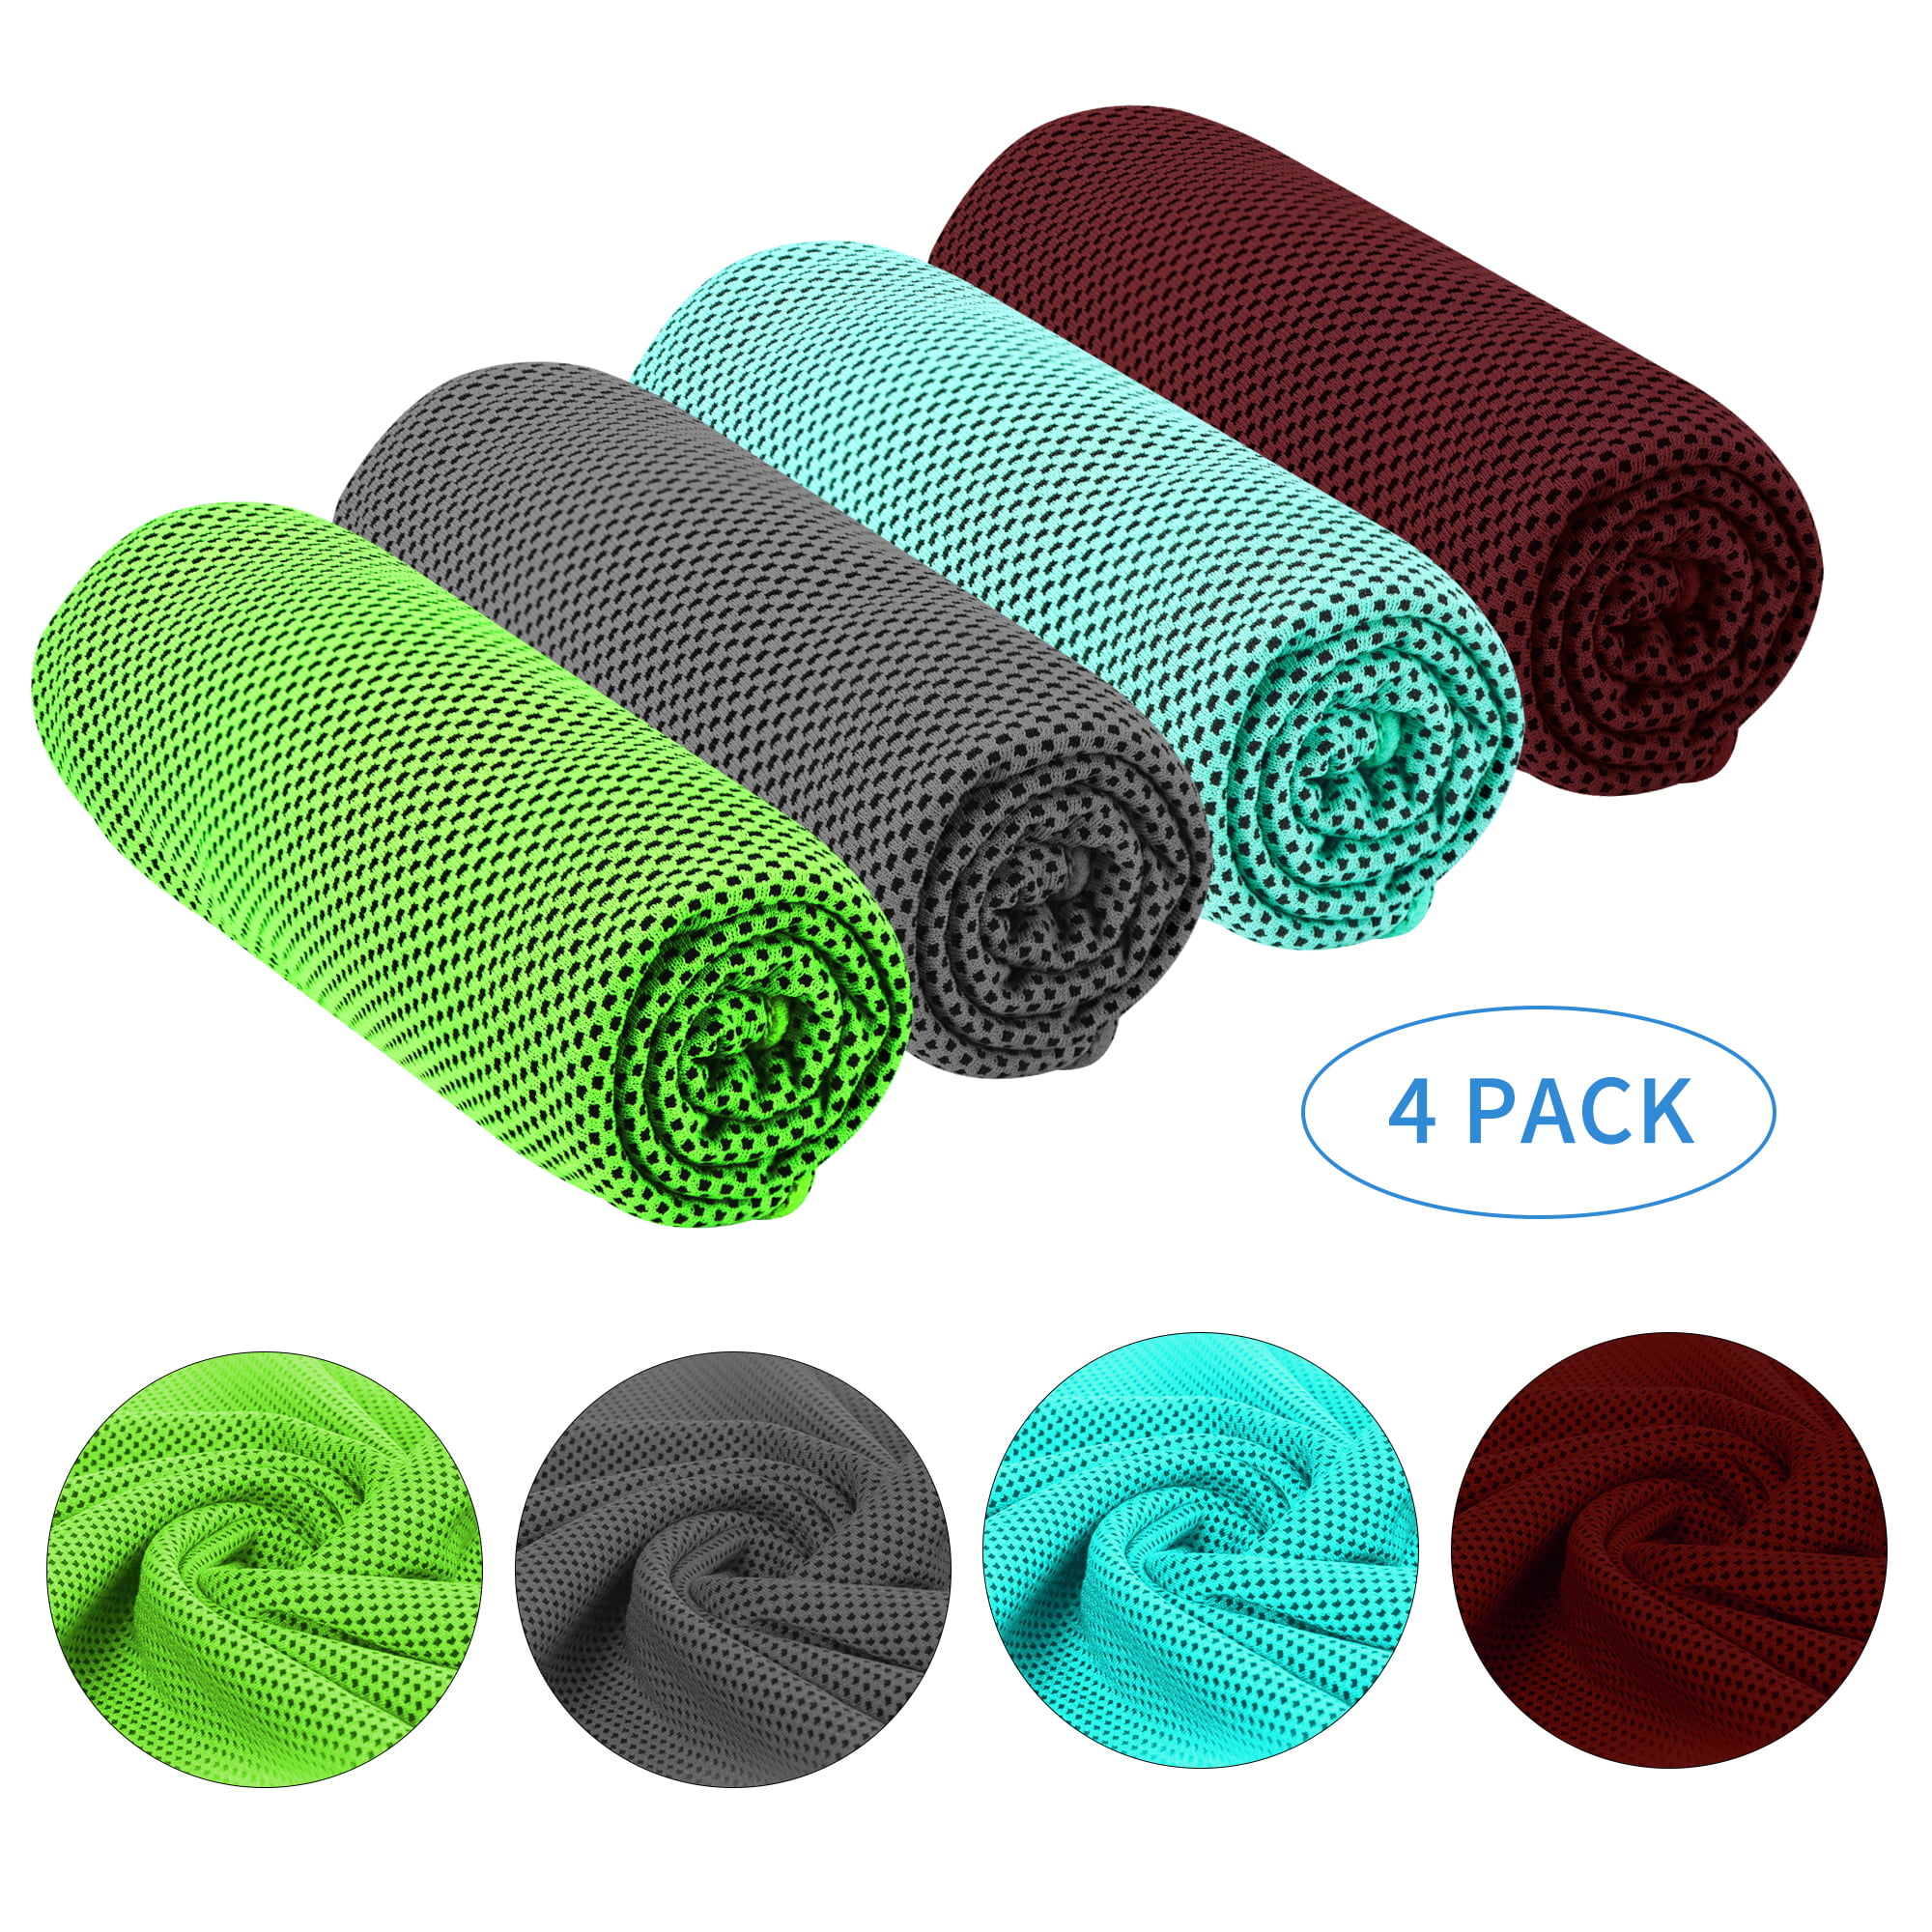 4 Packs Cooling Towel, Cooling Towels for Neck and Face Cool